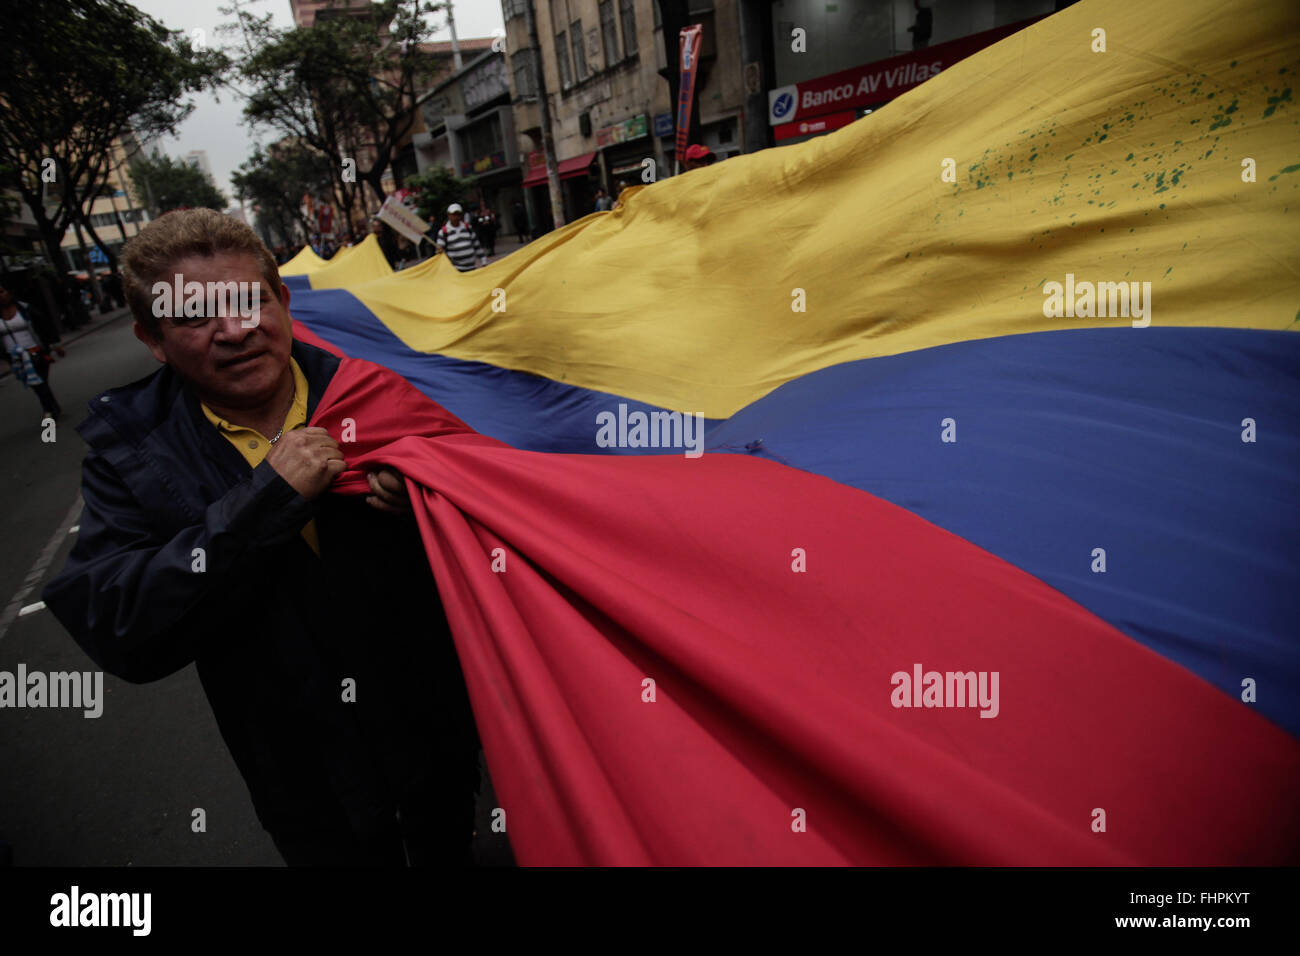 Bogota, Colombia. 25th Feb, 2016. A resident holds a national Colombian flag during a march called by student organizations and labor unions in Bogota, capital of Colombia, on Feb. 25, 2016. Hundreds of citizens, students and leaders of labor unions demonstrated against the value-added tax increase, the low increase to minimum wage, the mishandling of higher education and the sale of national companies. © Jhon Paz/Xinhua/Alamy Live News Stock Photo